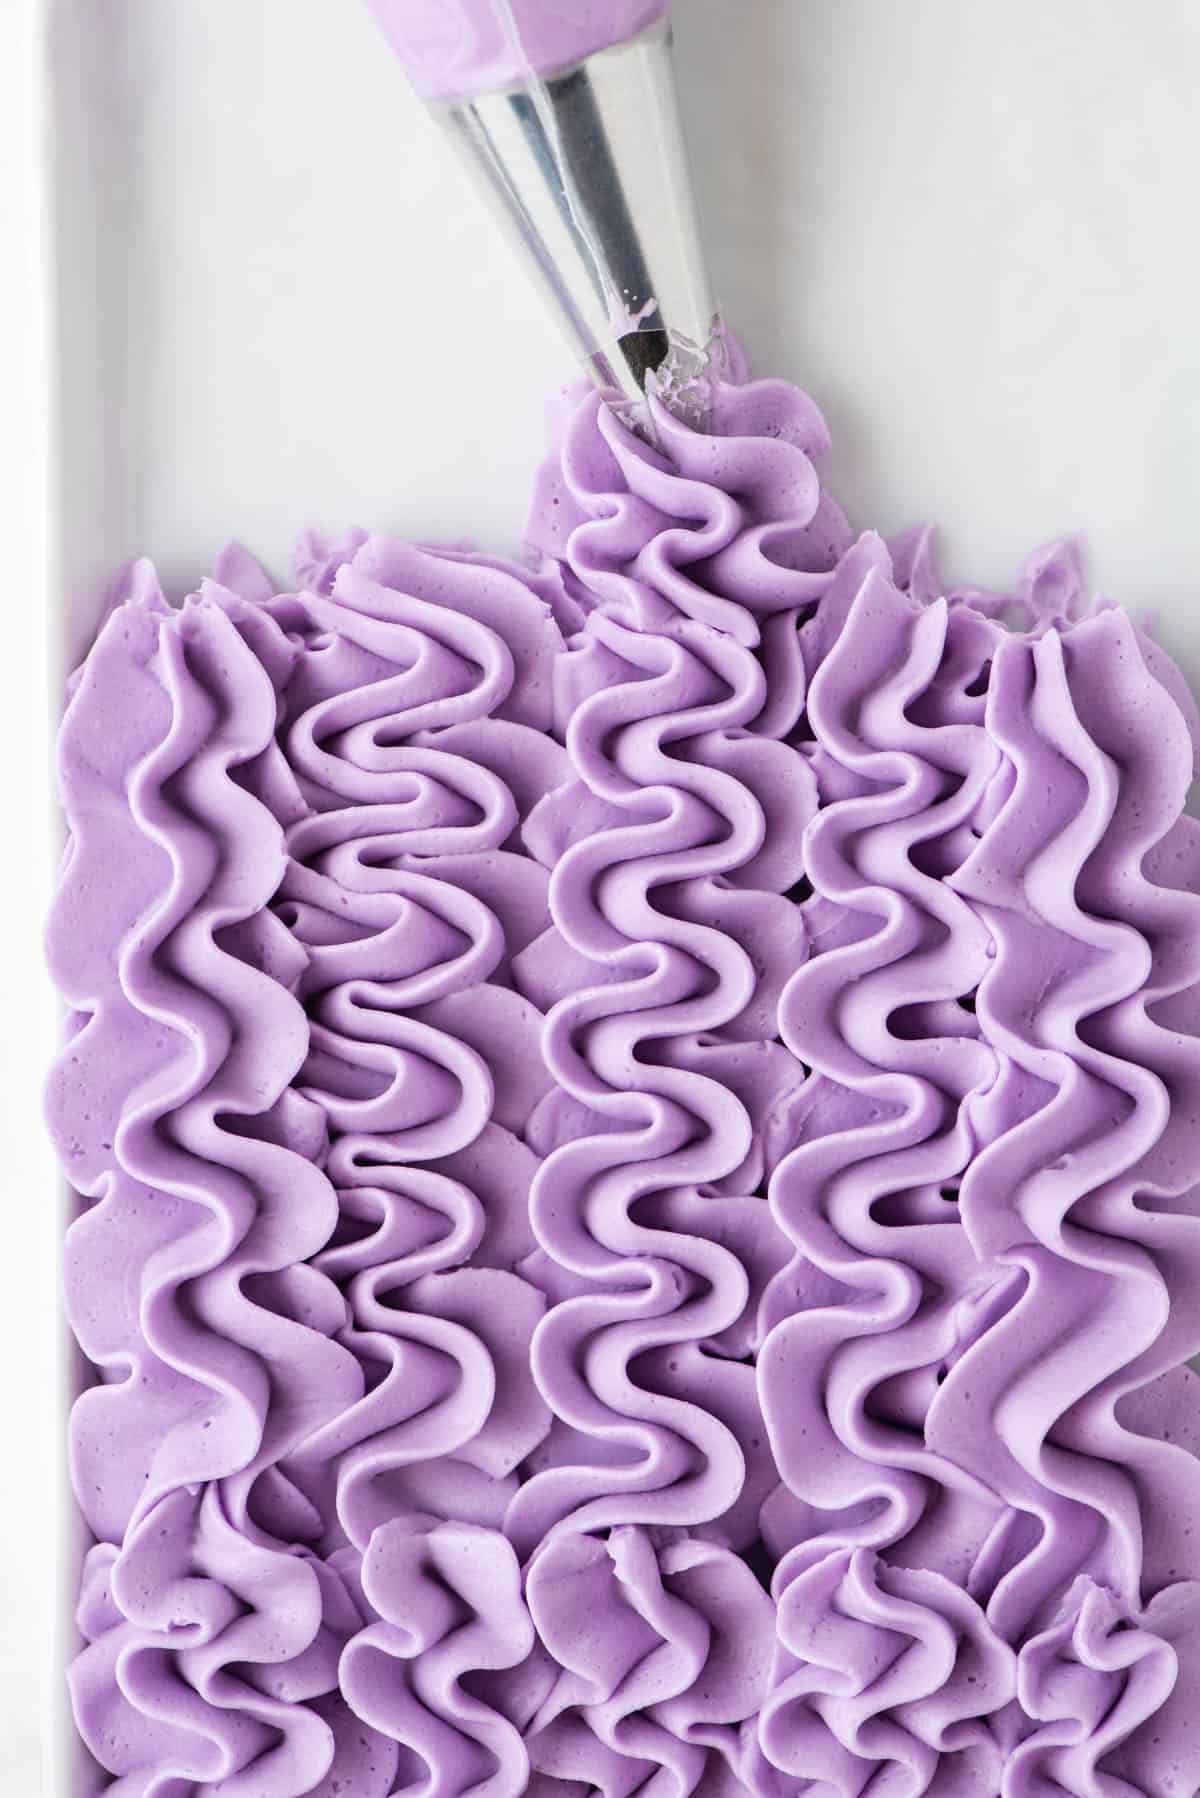 a pattern of piped vanilla frosting that has been colored purple